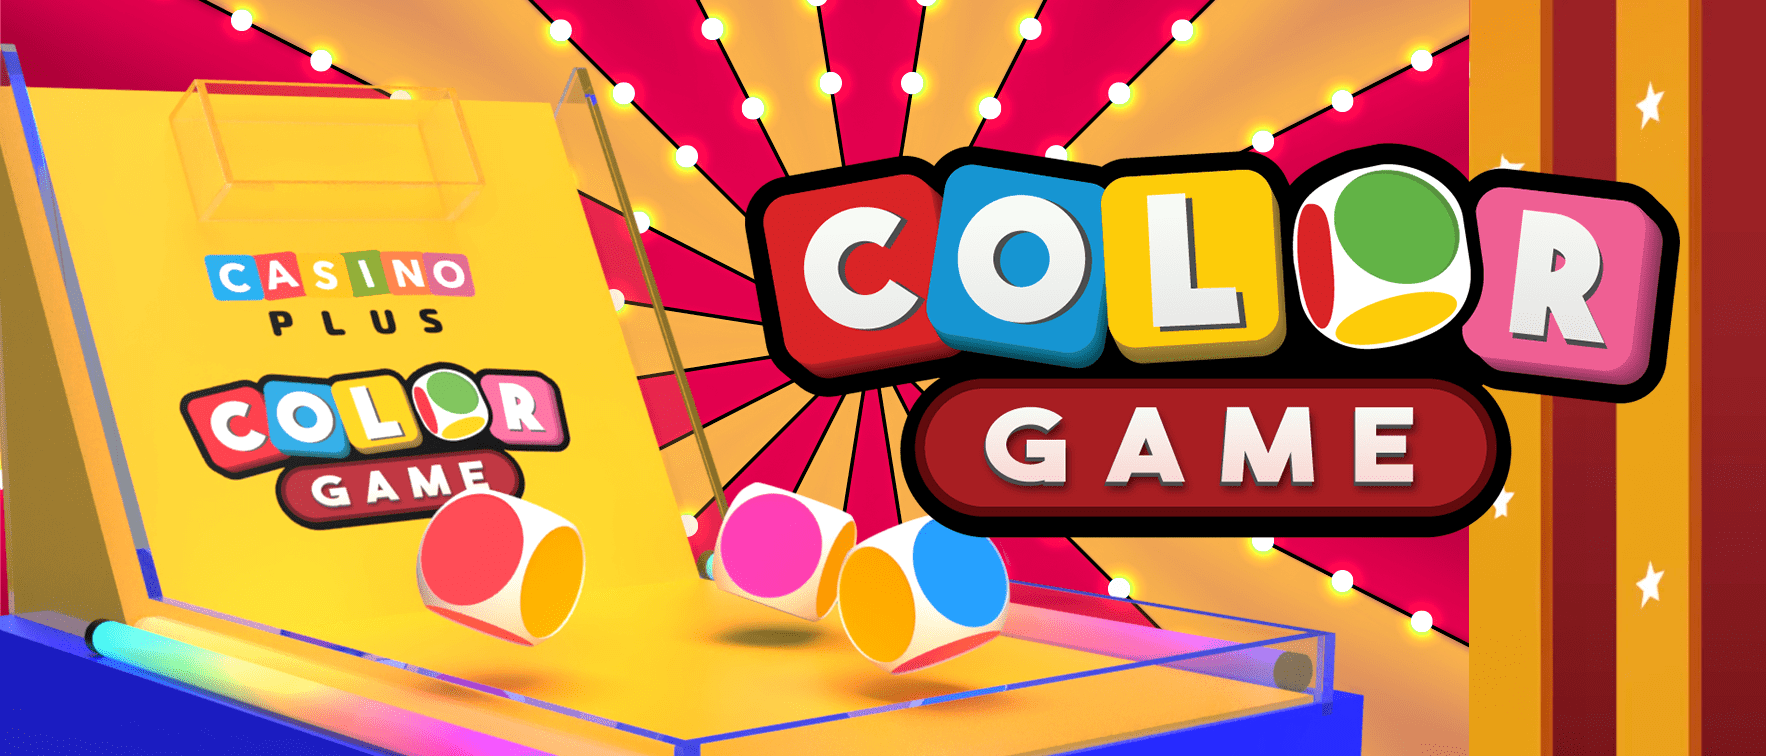 Casino Plus Color Game Betting Odds CG01-24022605 February 25 2024